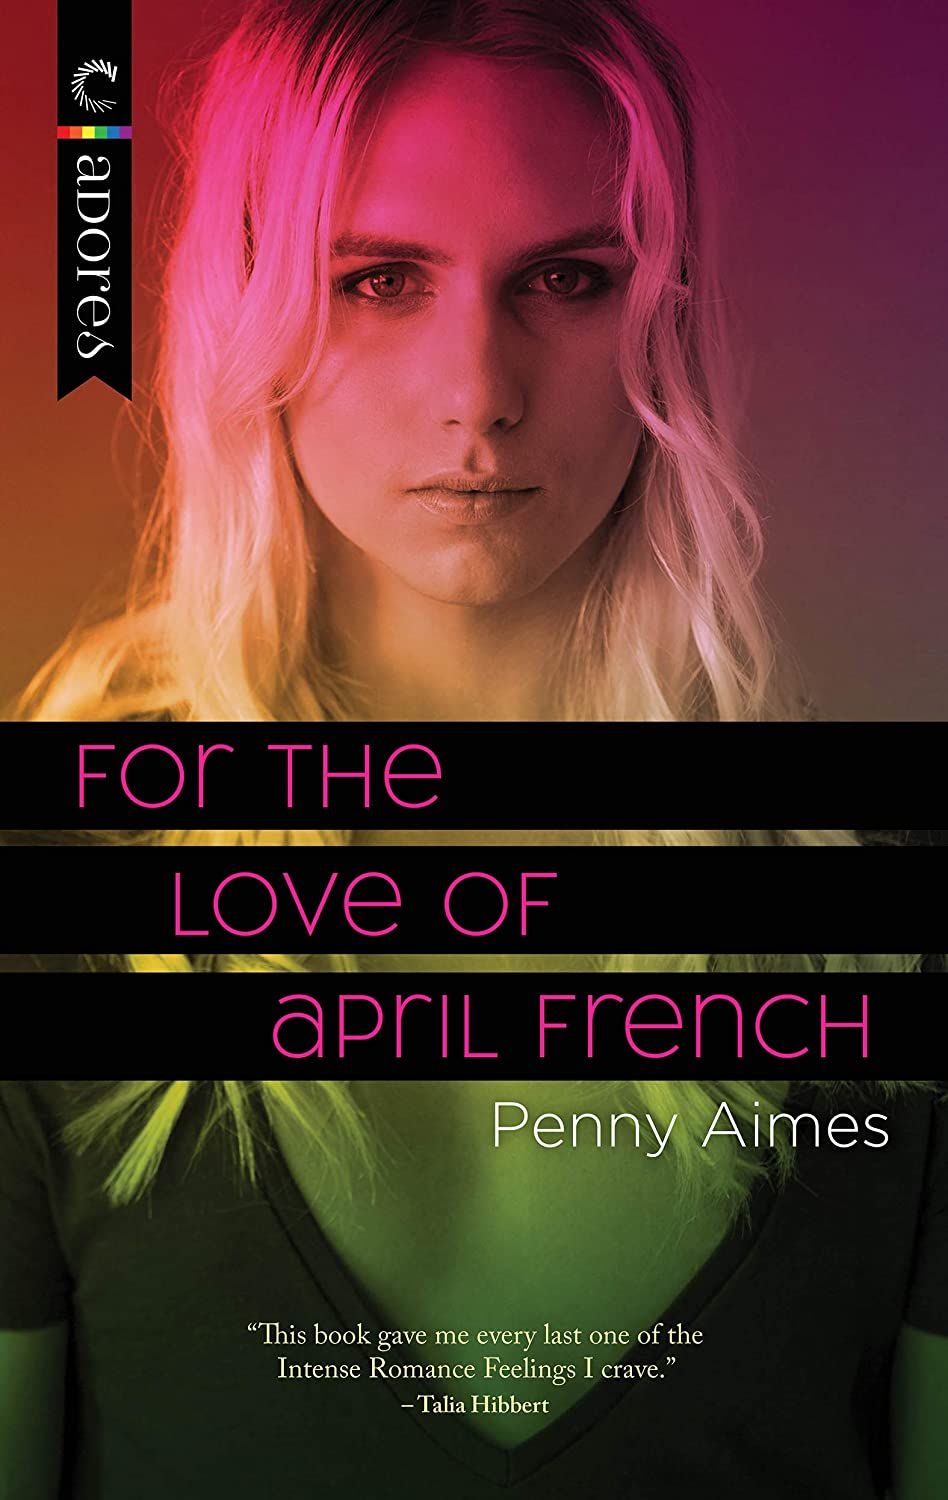 For the Love of April French by Penny Acmes